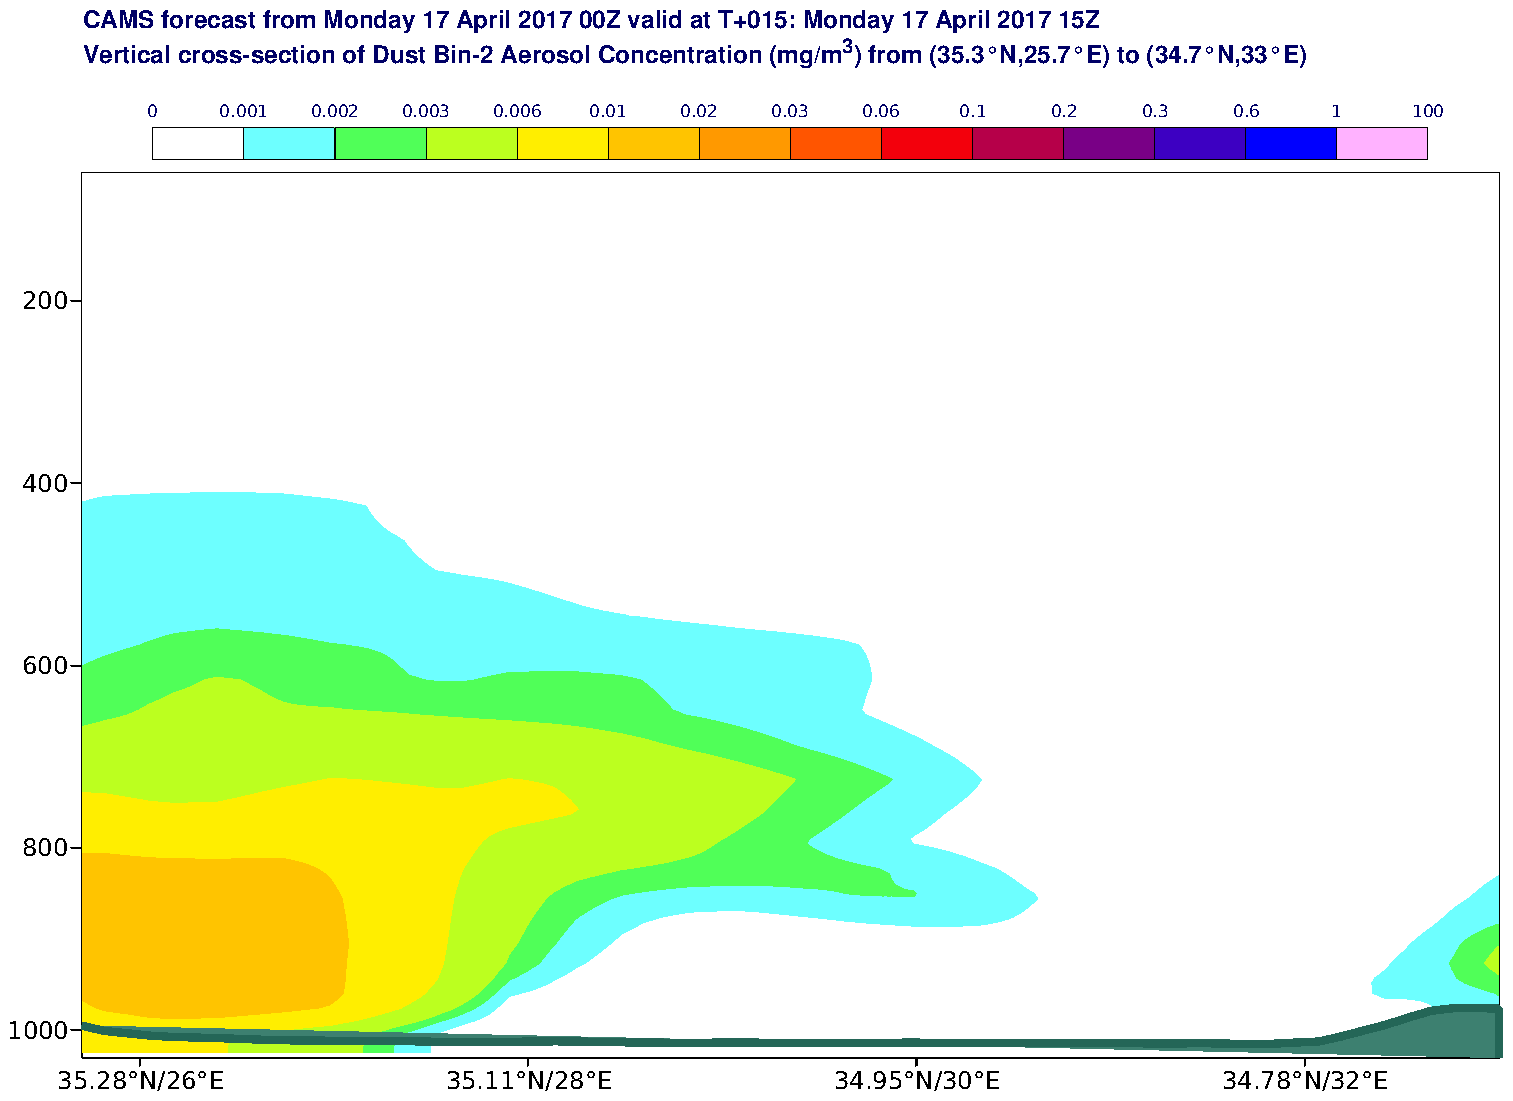 Vertical cross-section of Dust Bin-2 Aerosol Concentration (mg/m3) valid at T15 - 2017-04-17 15:00